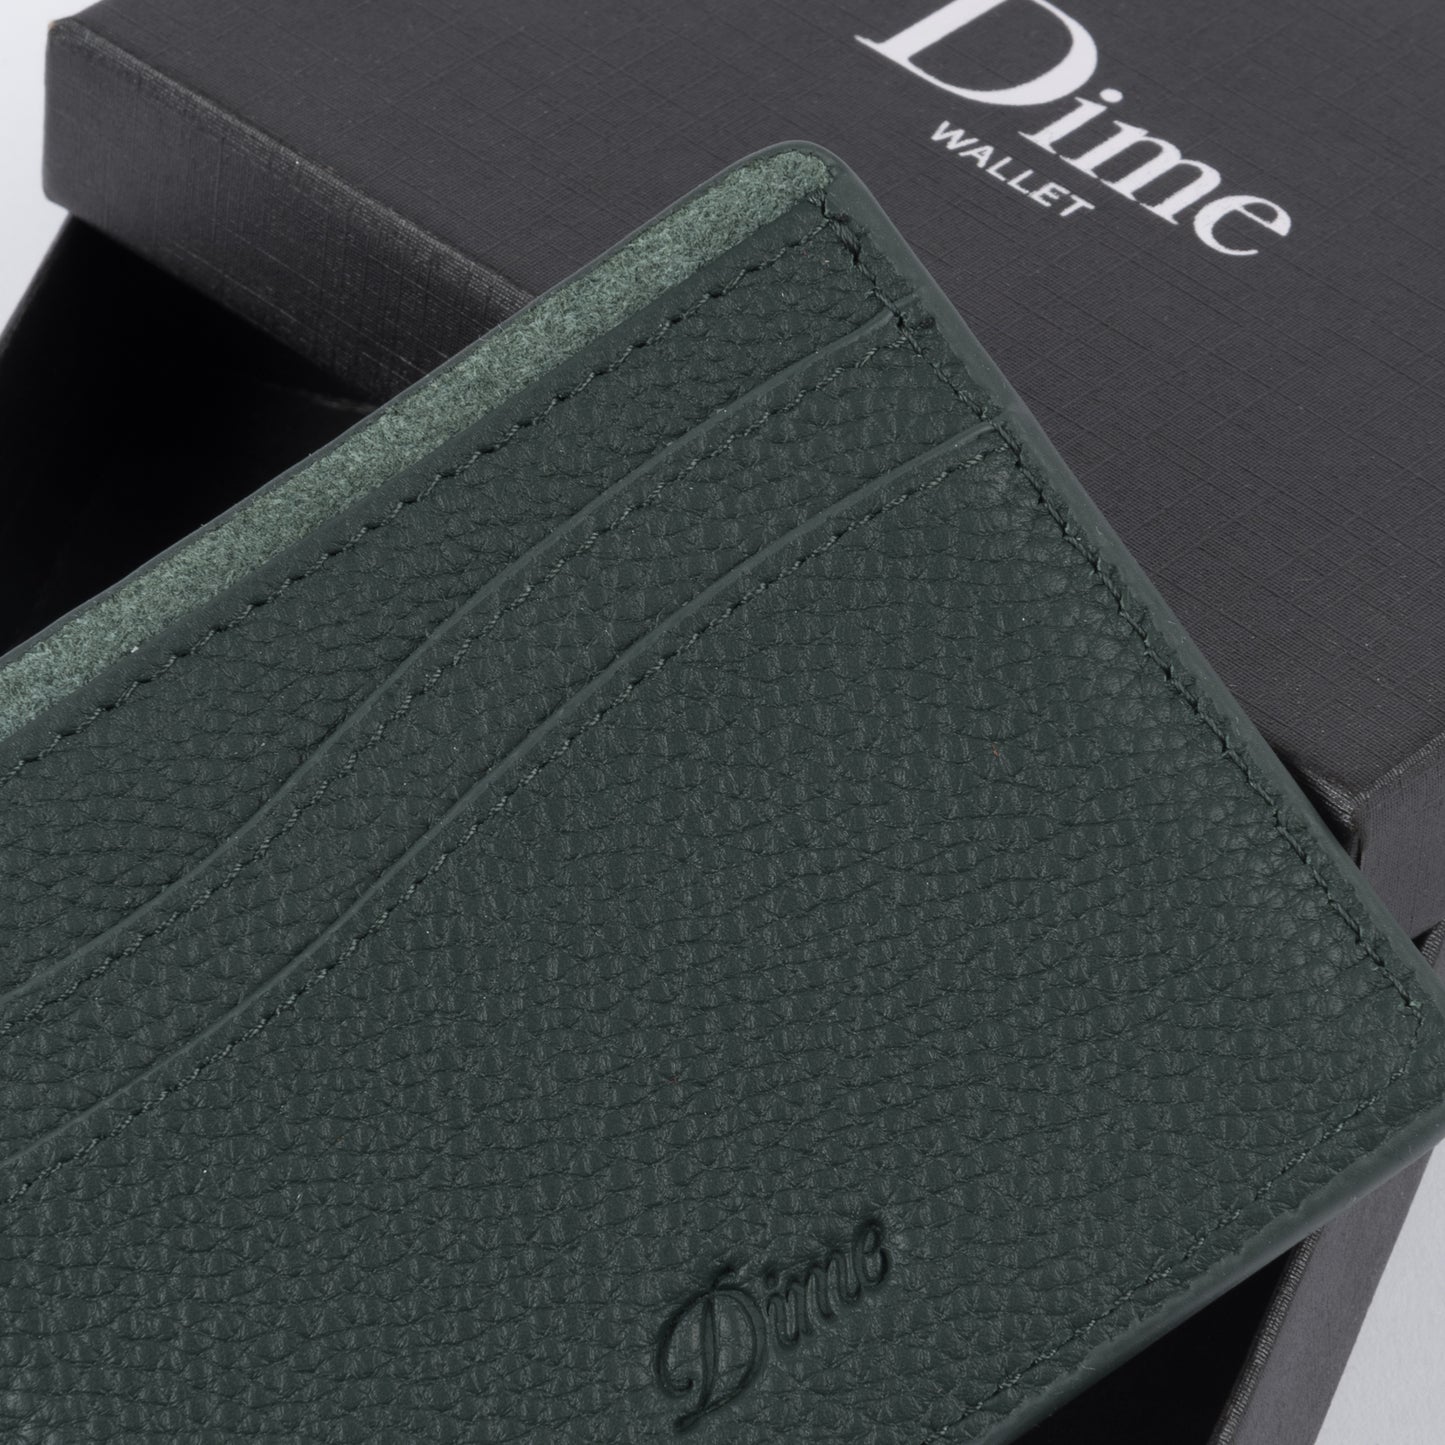 Dime Studded Bifold Wallet Forest